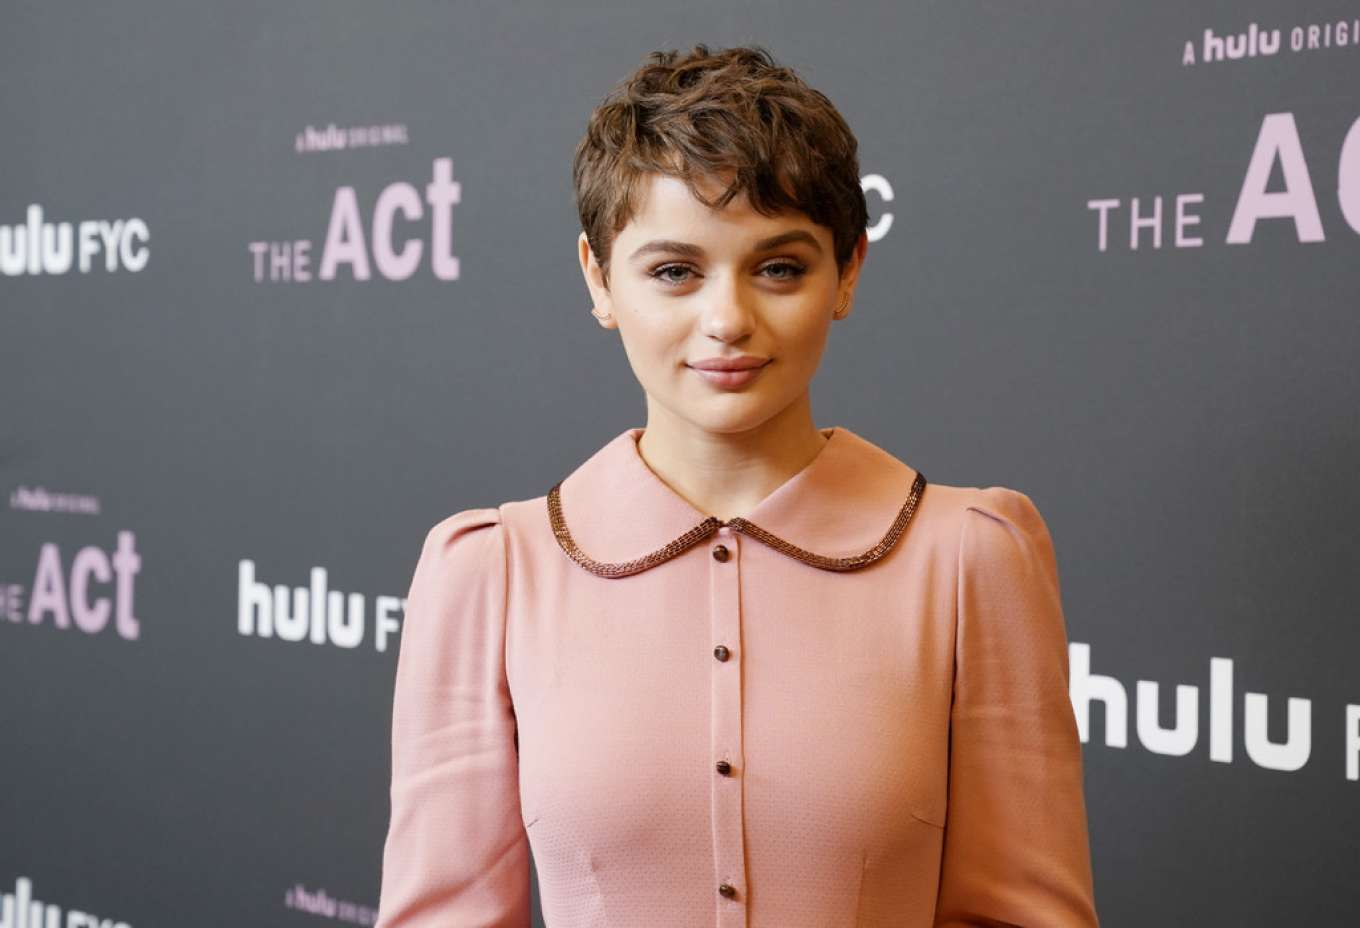 Joey King â€“ Hulus The Act FYC Event in Hollywood